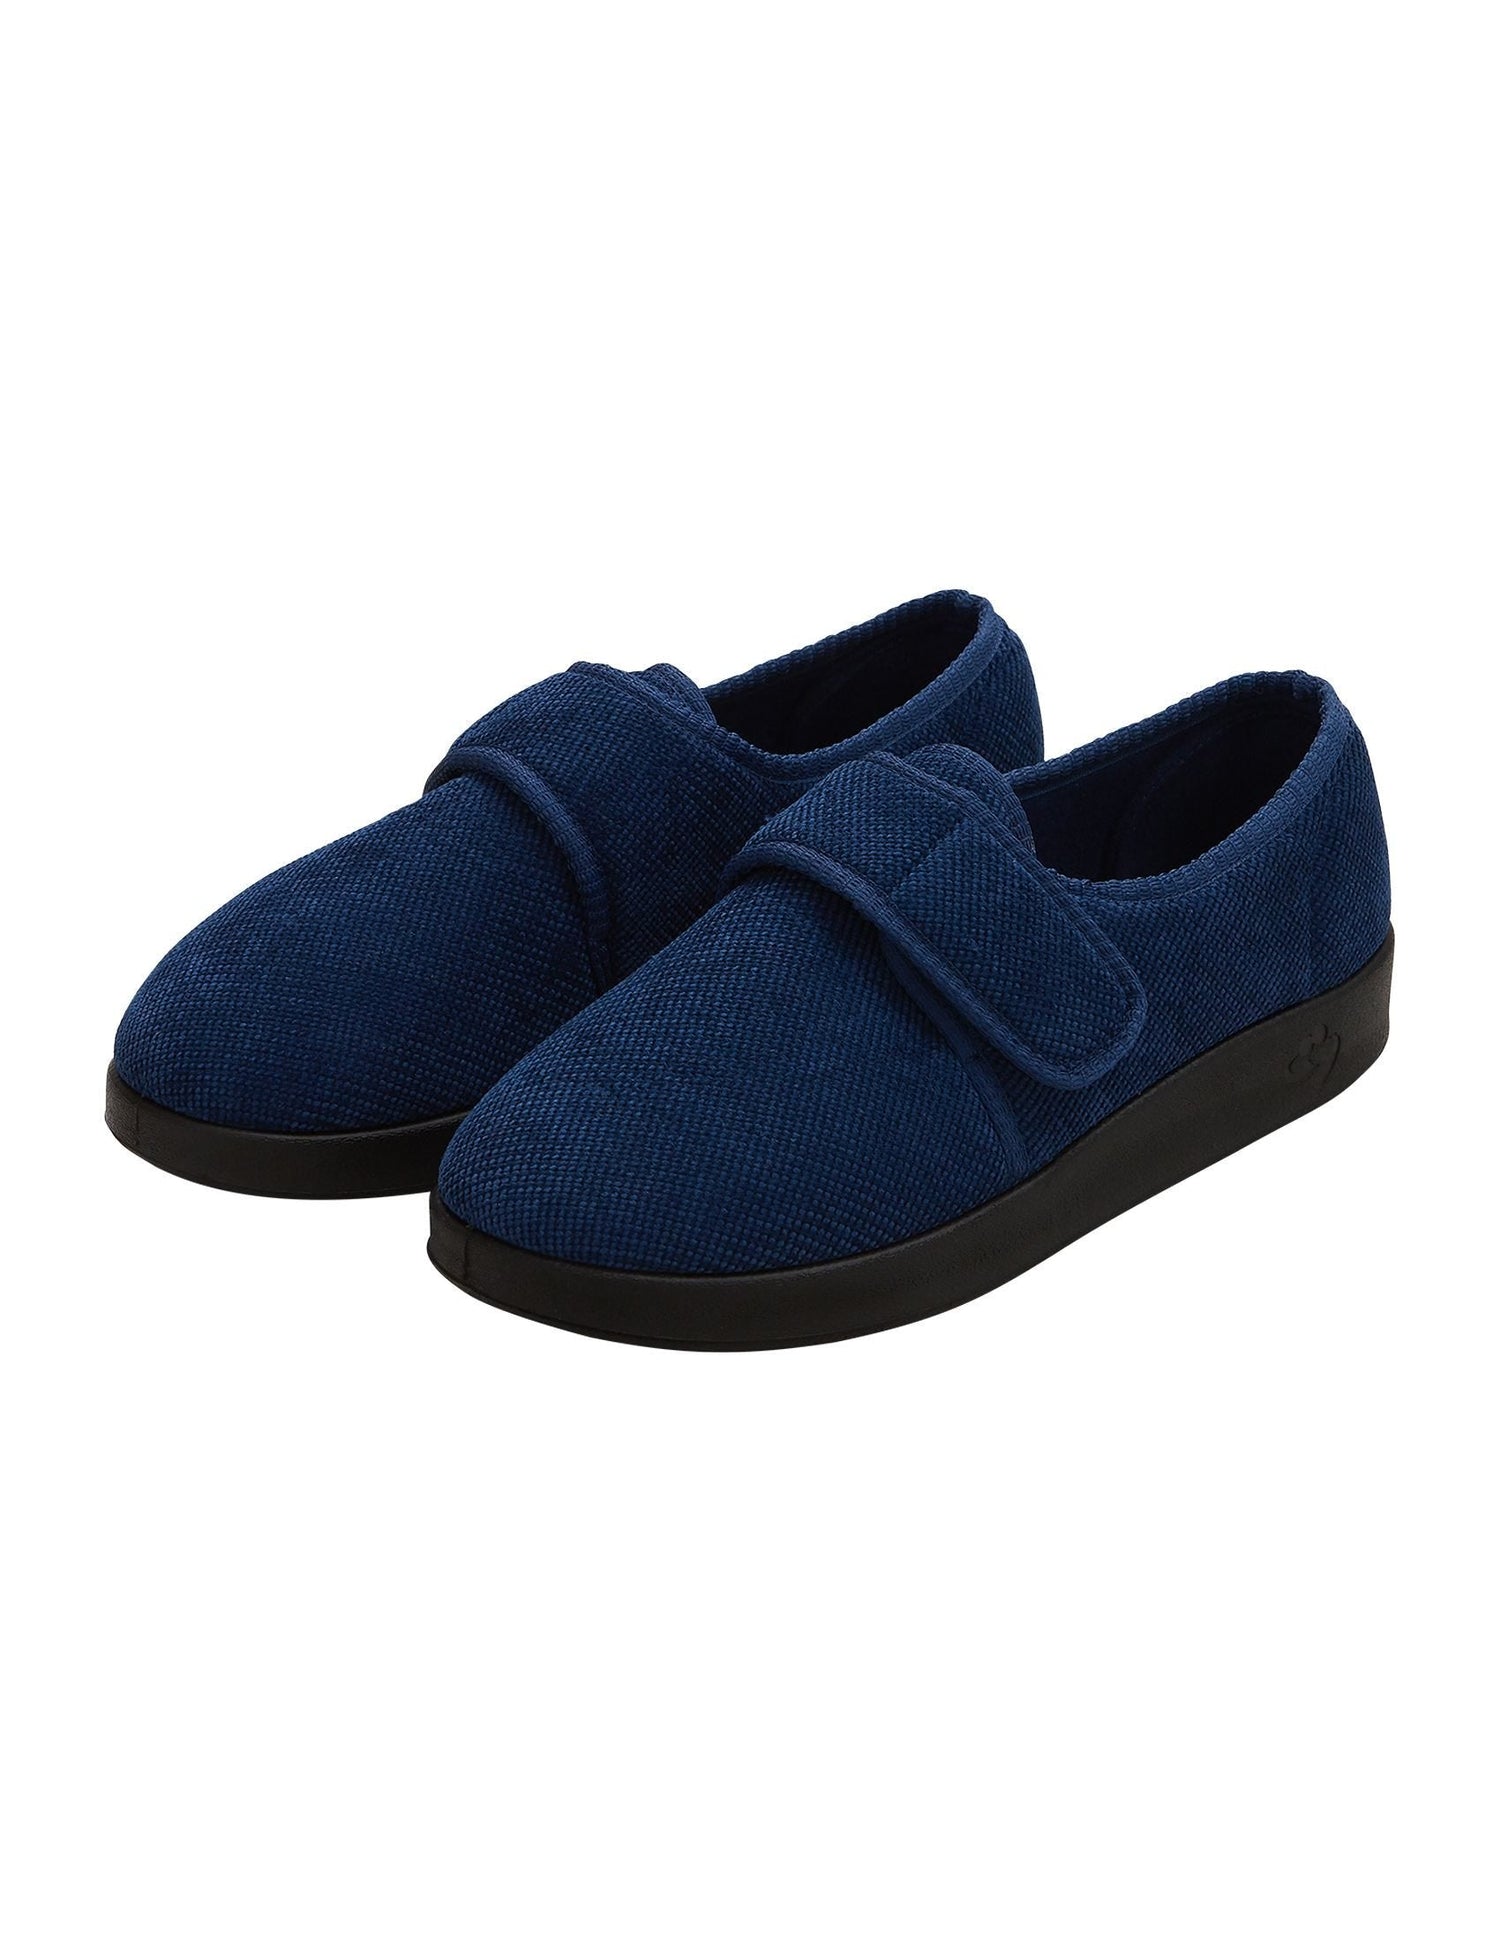 Wide soft navy indoor slippers with large Velcro closure at front and black soles